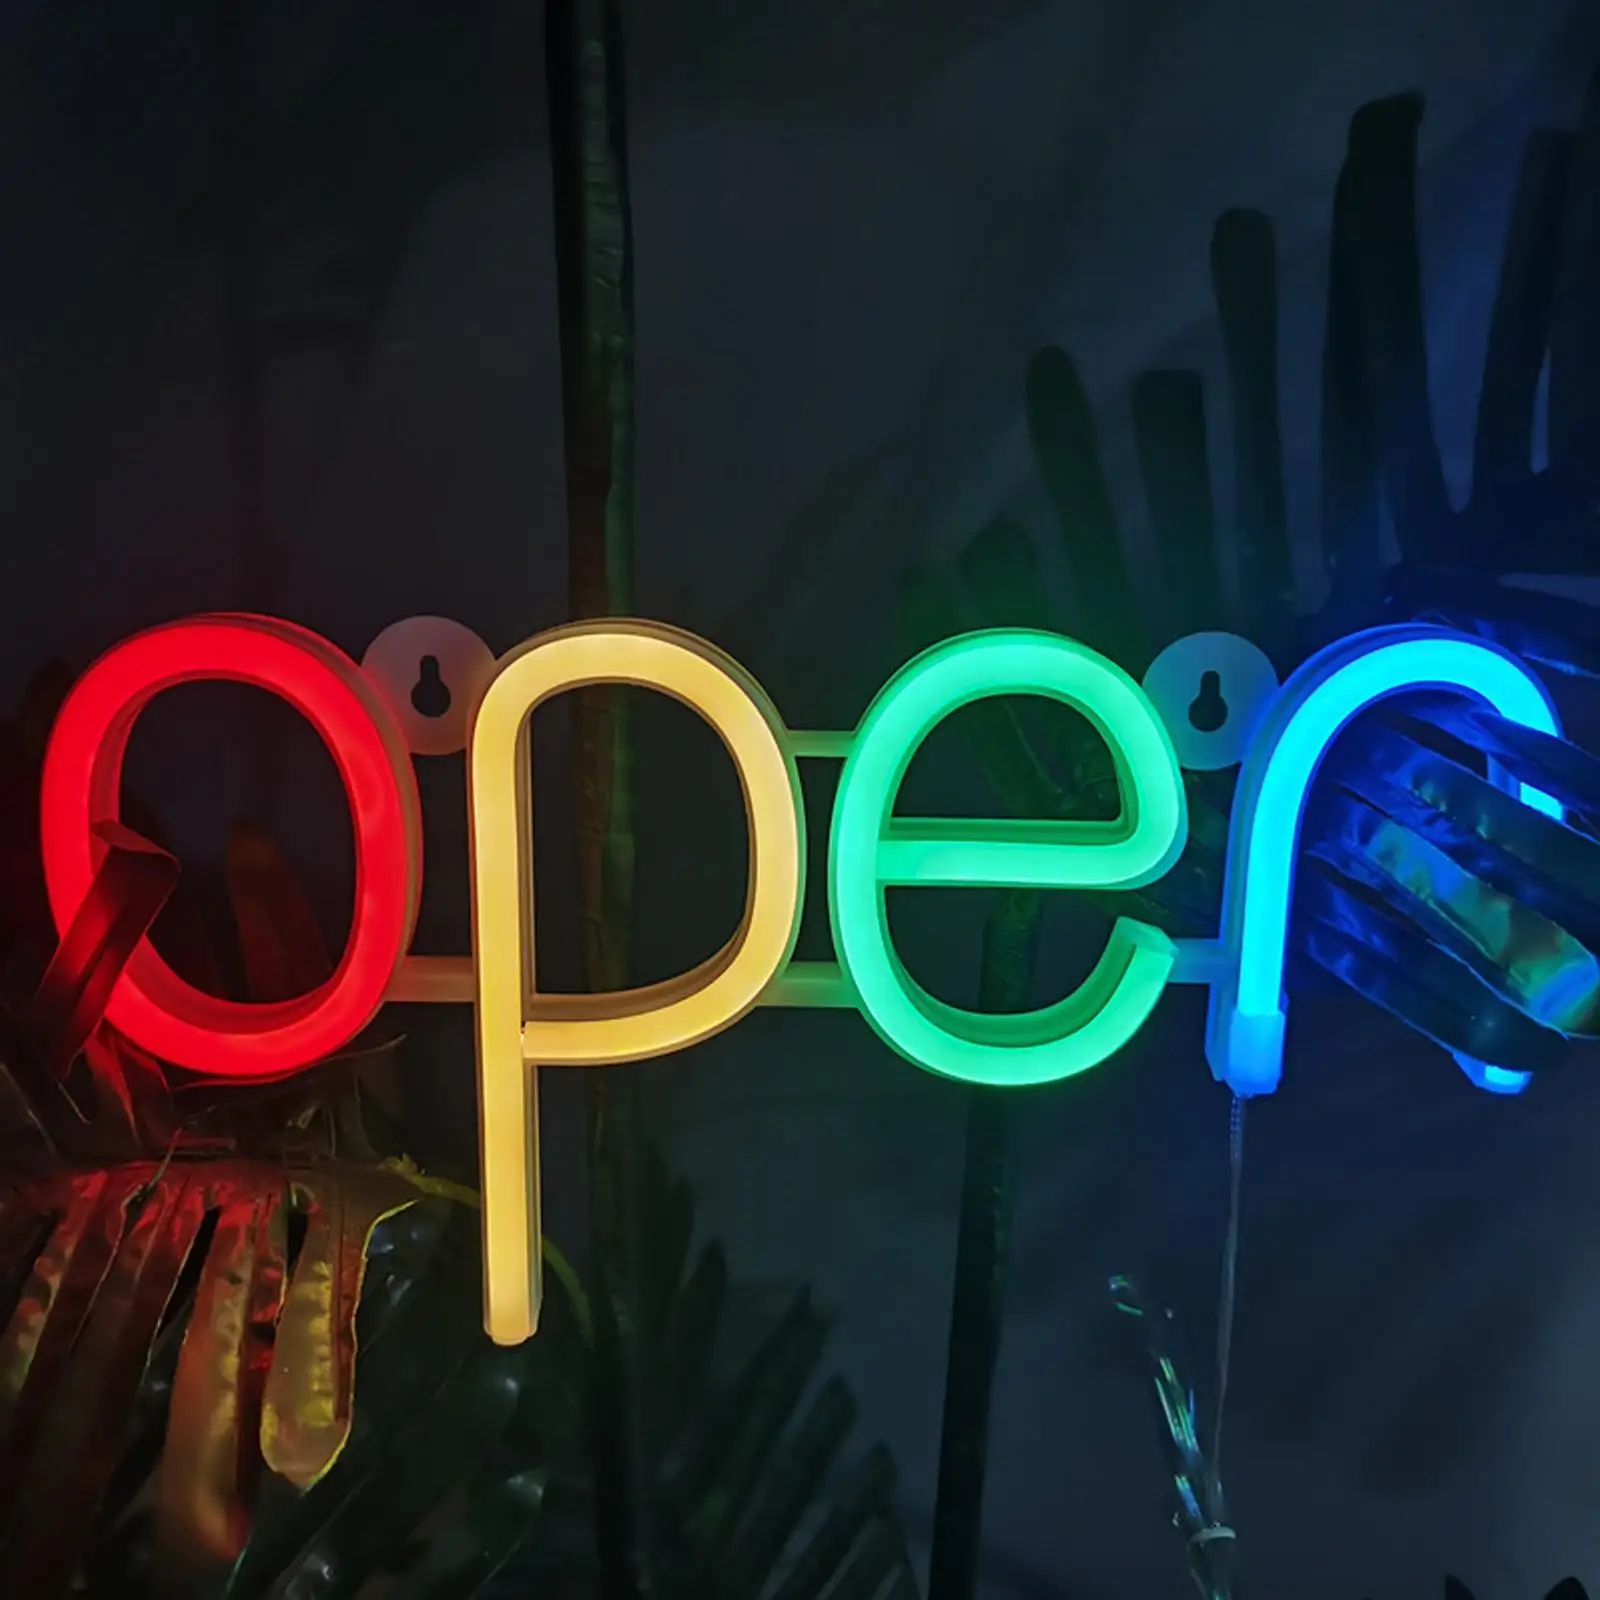 LED Open Sign Lighting Neon Lights Battery Powered Restaurant Wall Hanging Bar Lamp for Cafe Shop Display Window Game Club